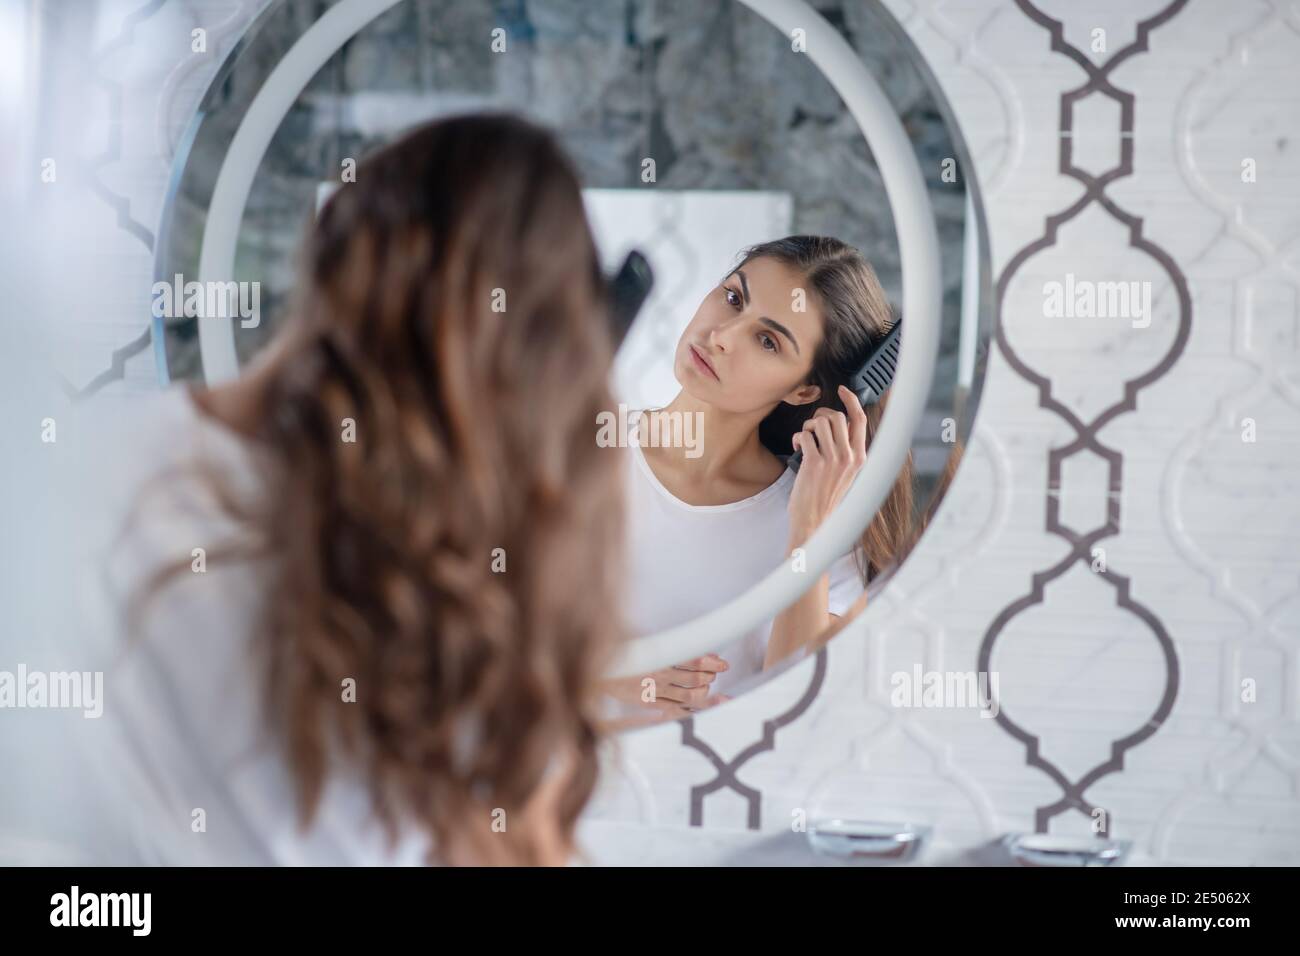 Woman combing her hair near the mirror Stock Photo